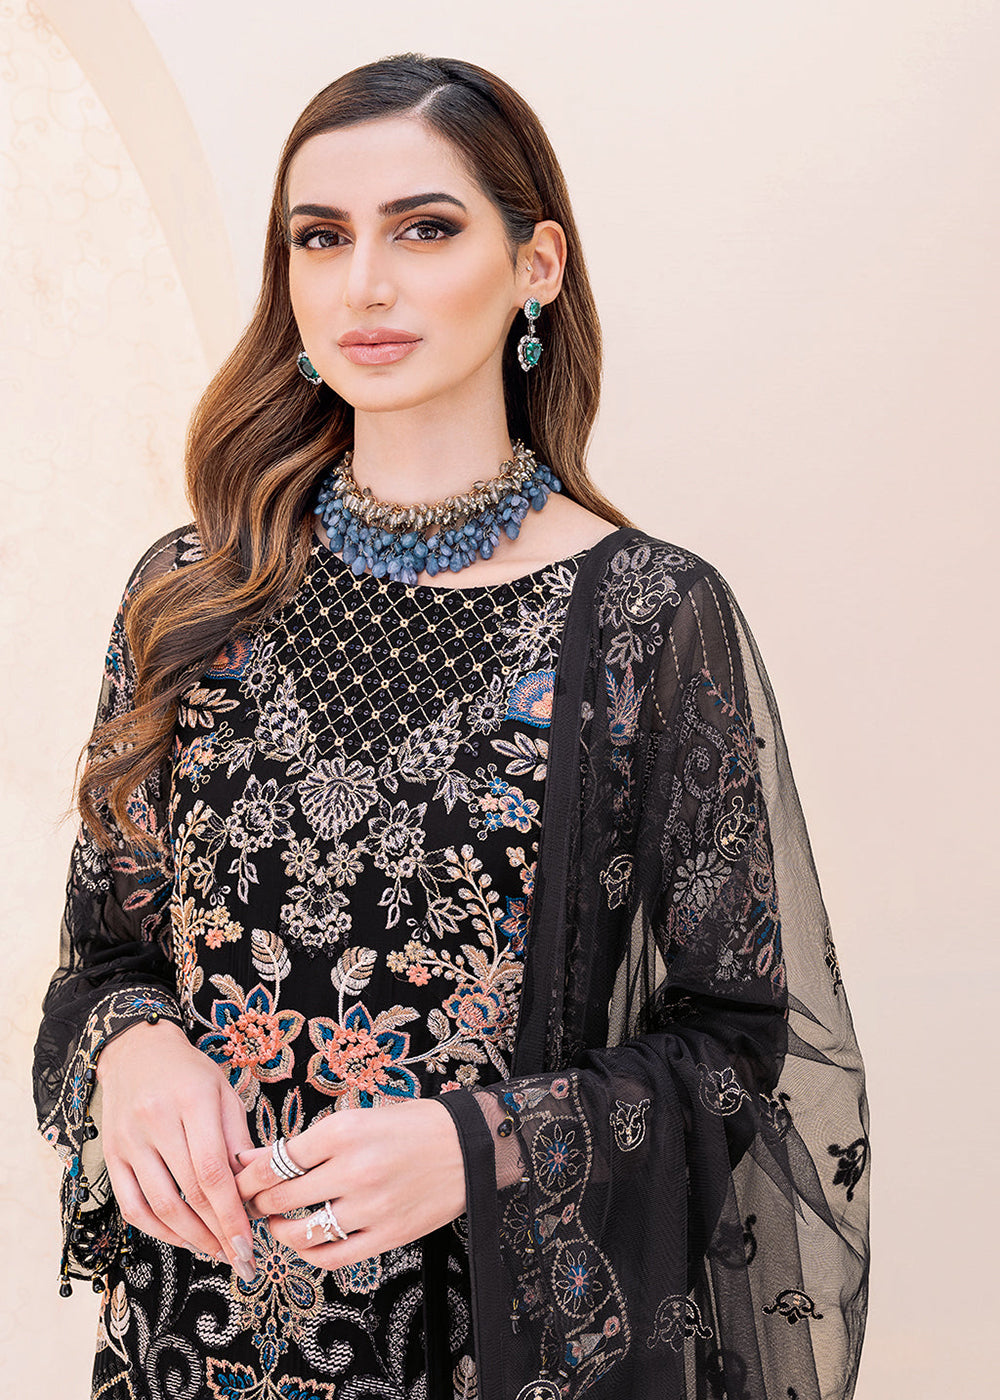 Buy Now Black Embroidered Suit - Chiffon Vol 23 by Ramsha - #F-2301 Online in USA, UK, Canada & Worldwide at Empress Clothing. 